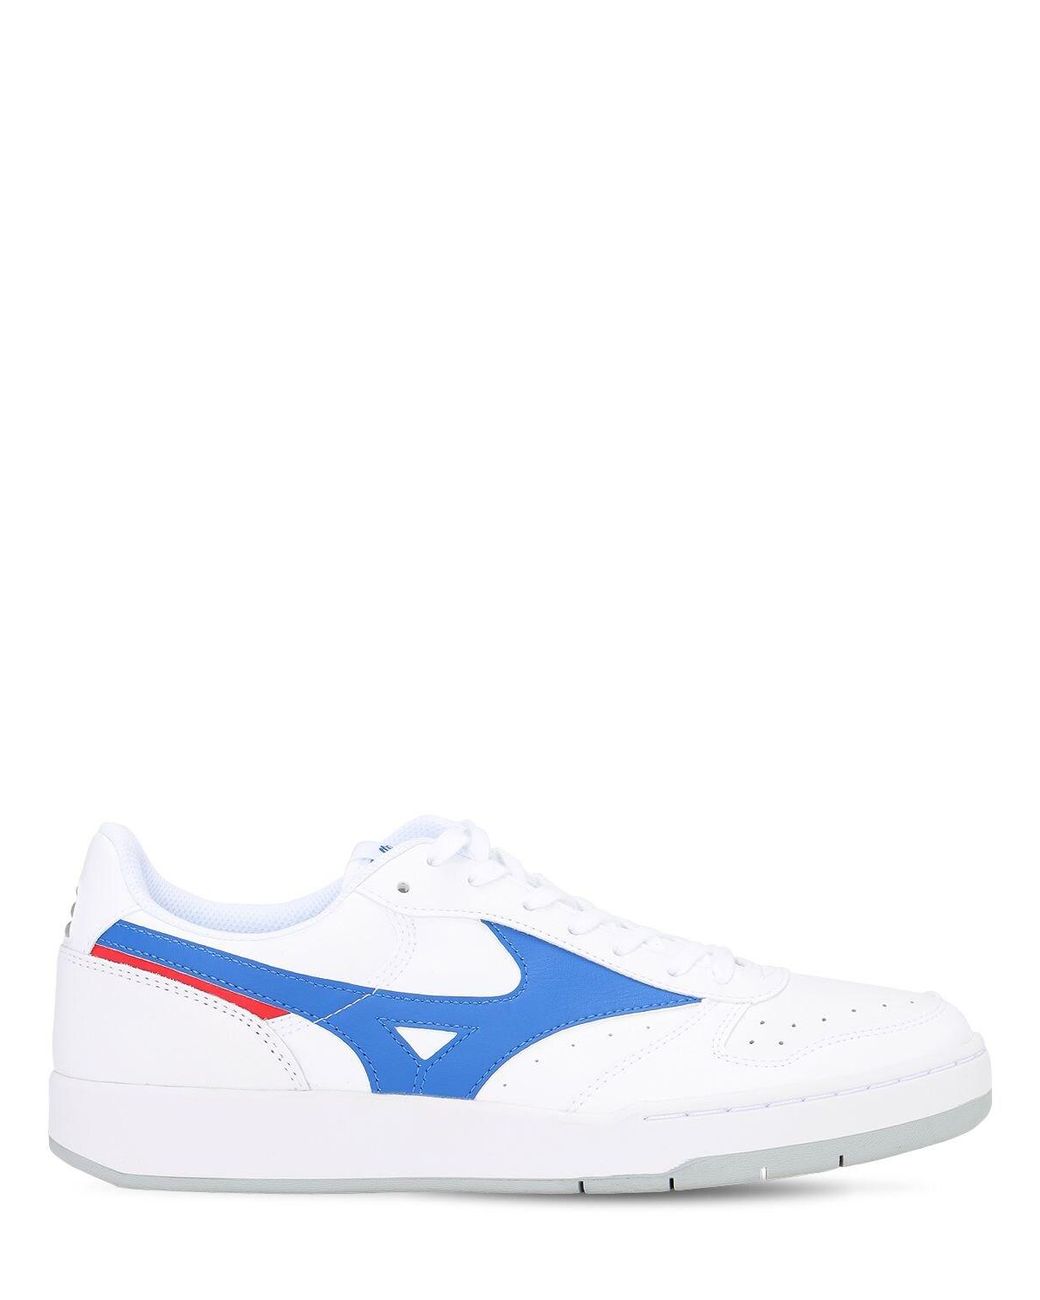 Mizuno Suede City Wind Sneakers in White/Blue (Blue) for Men - Lyst